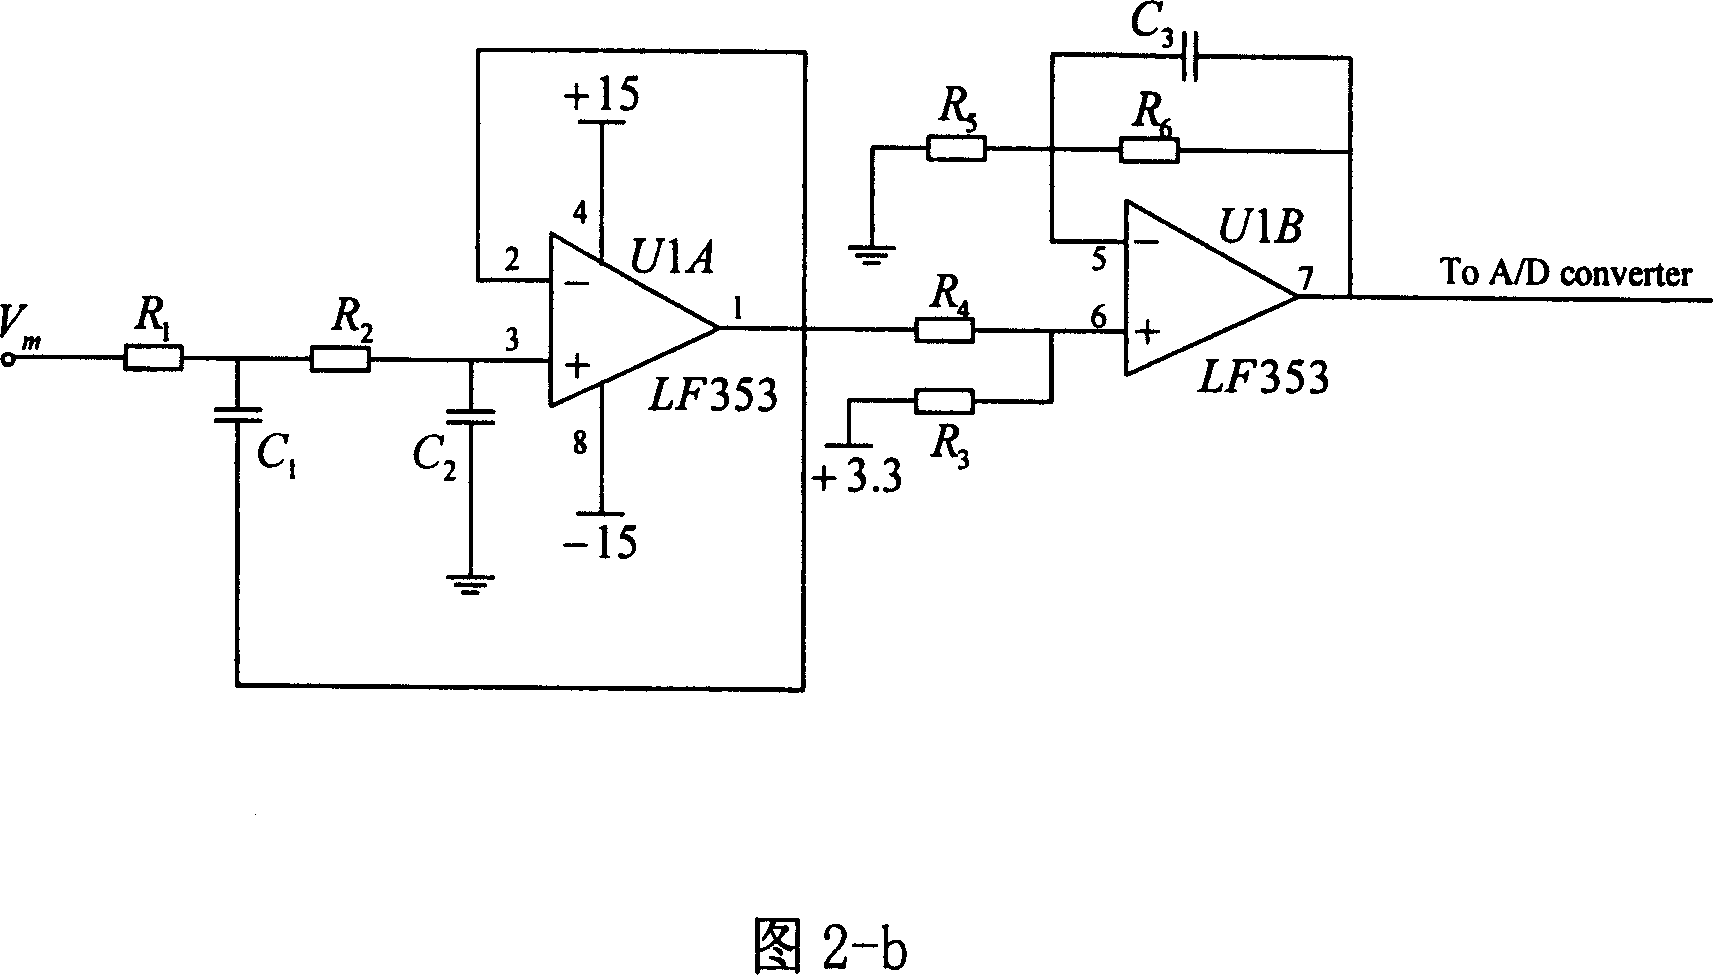 Load managing and control system based on DSP technology and expert control system and its working method